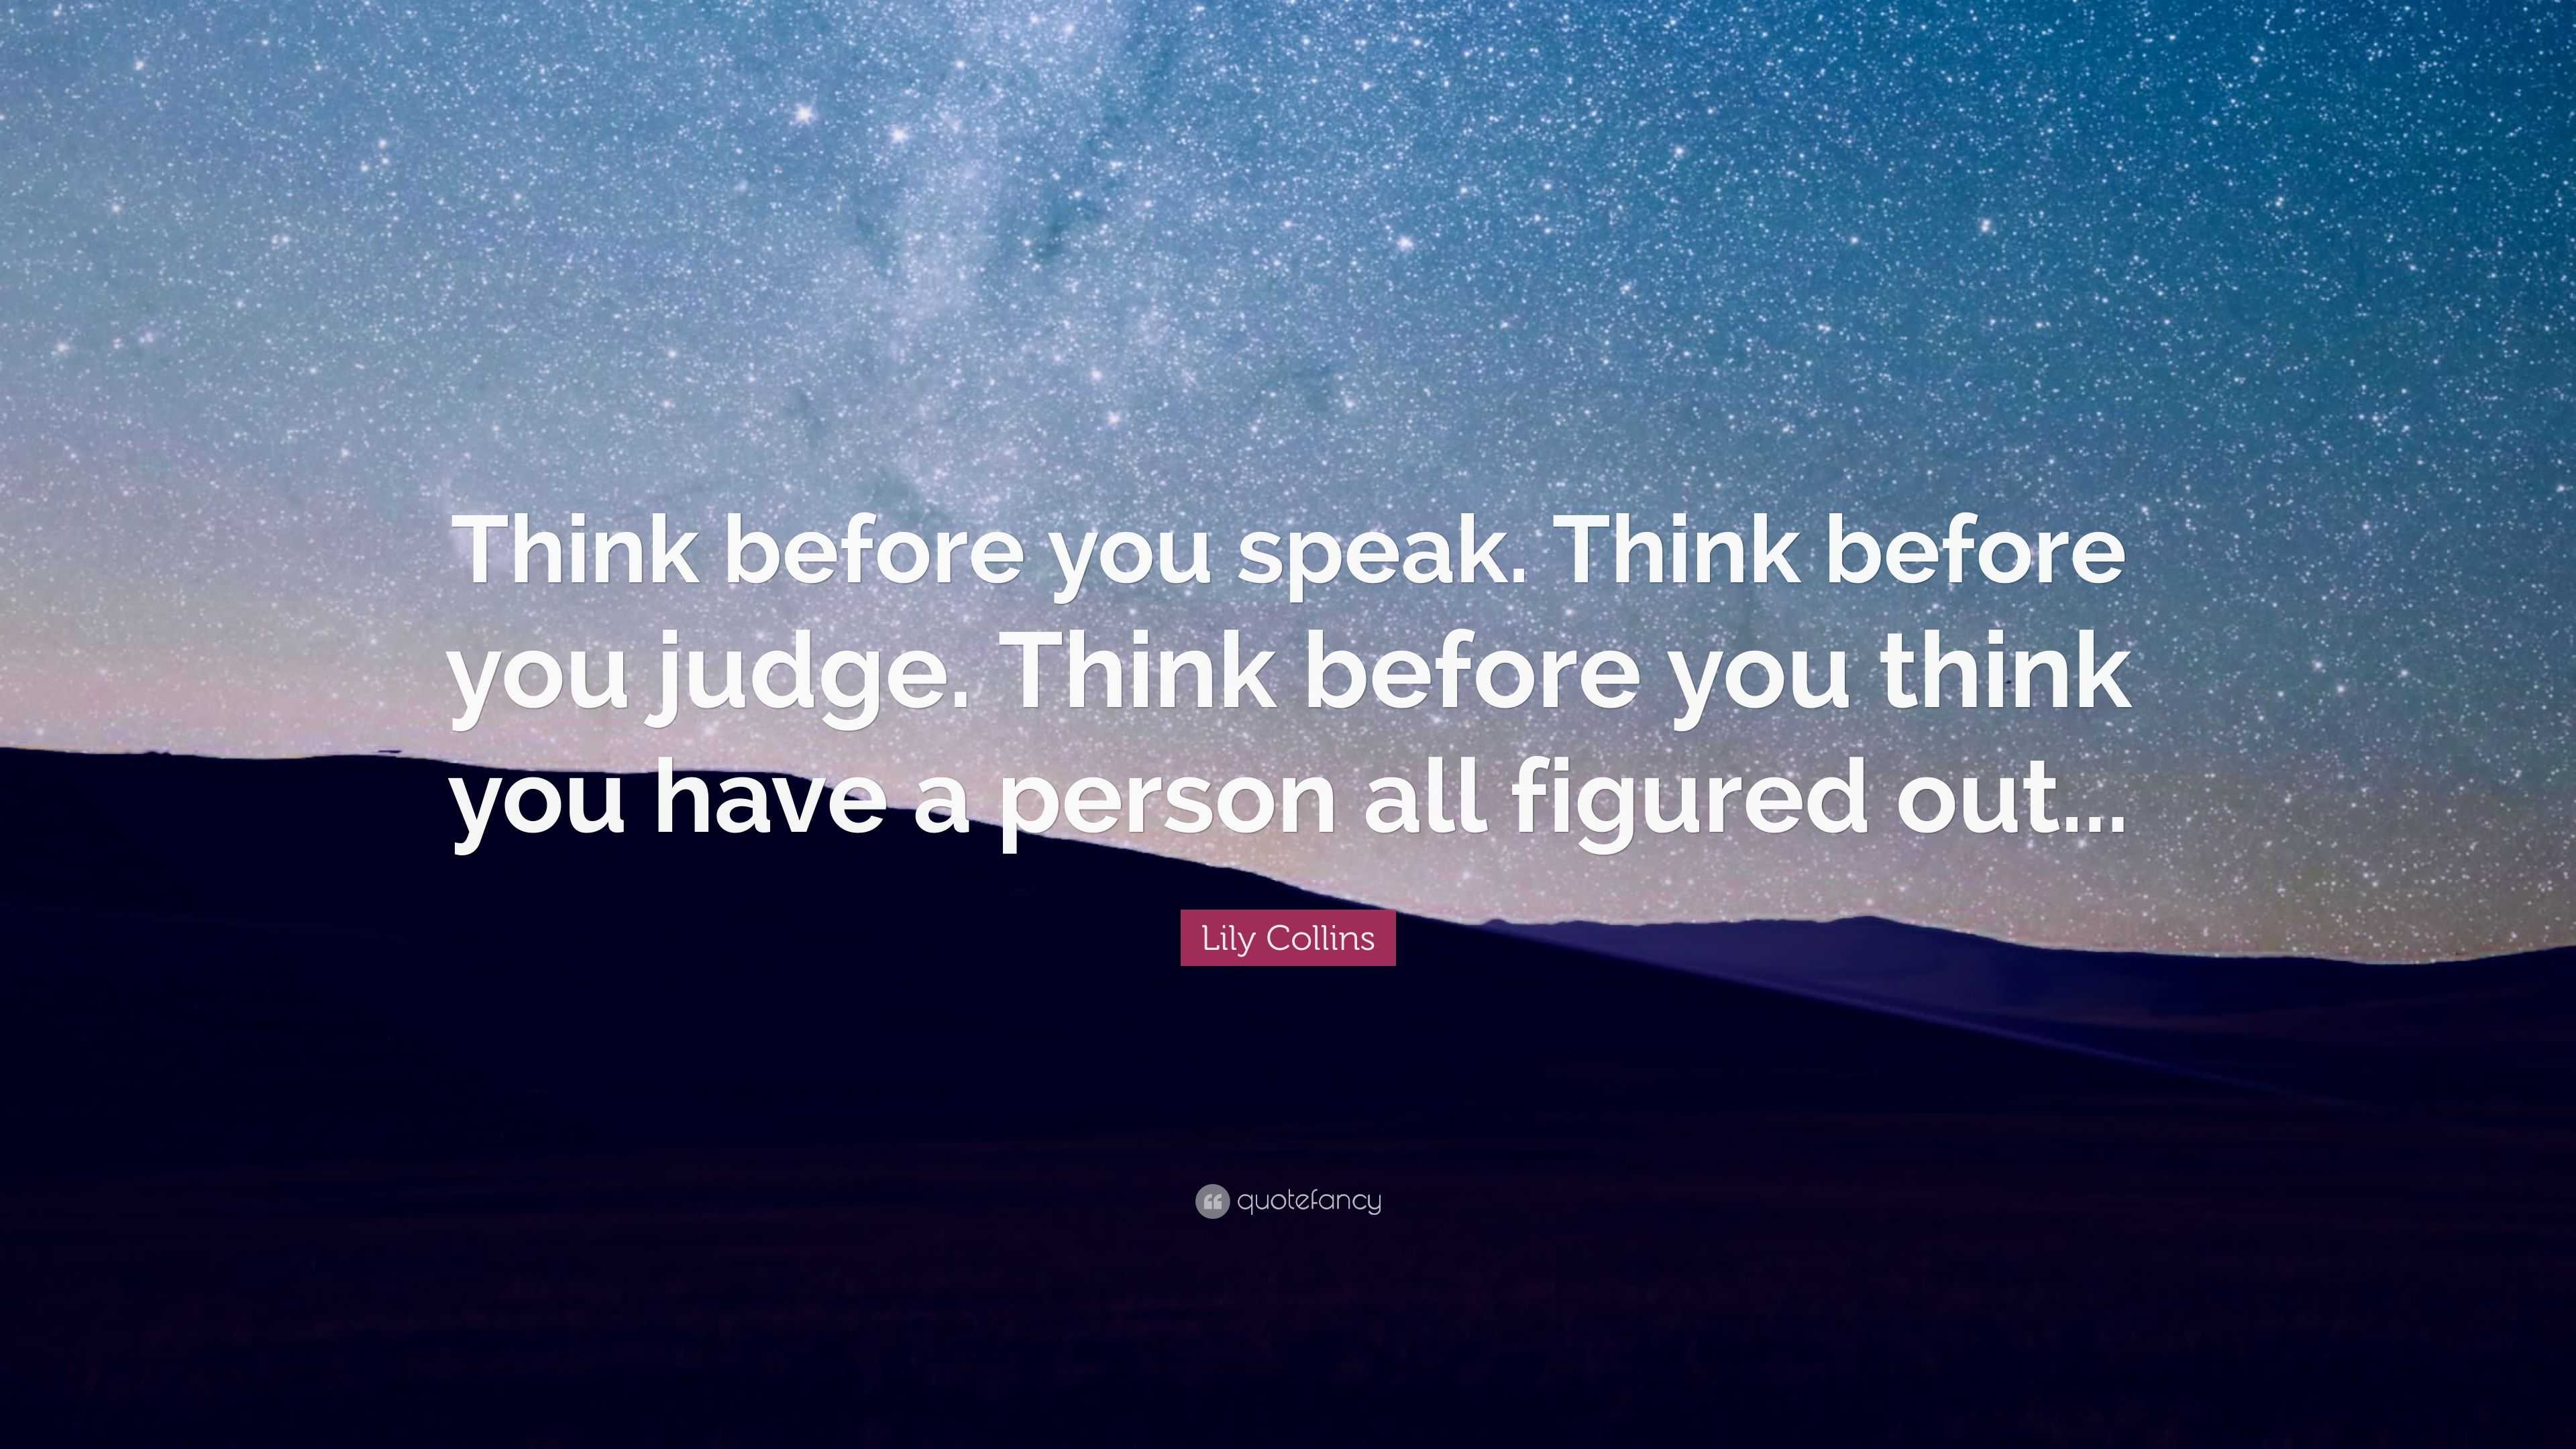 Lily Collins Quote: "Think before you speak. Think before you judge. Think before you think you ...